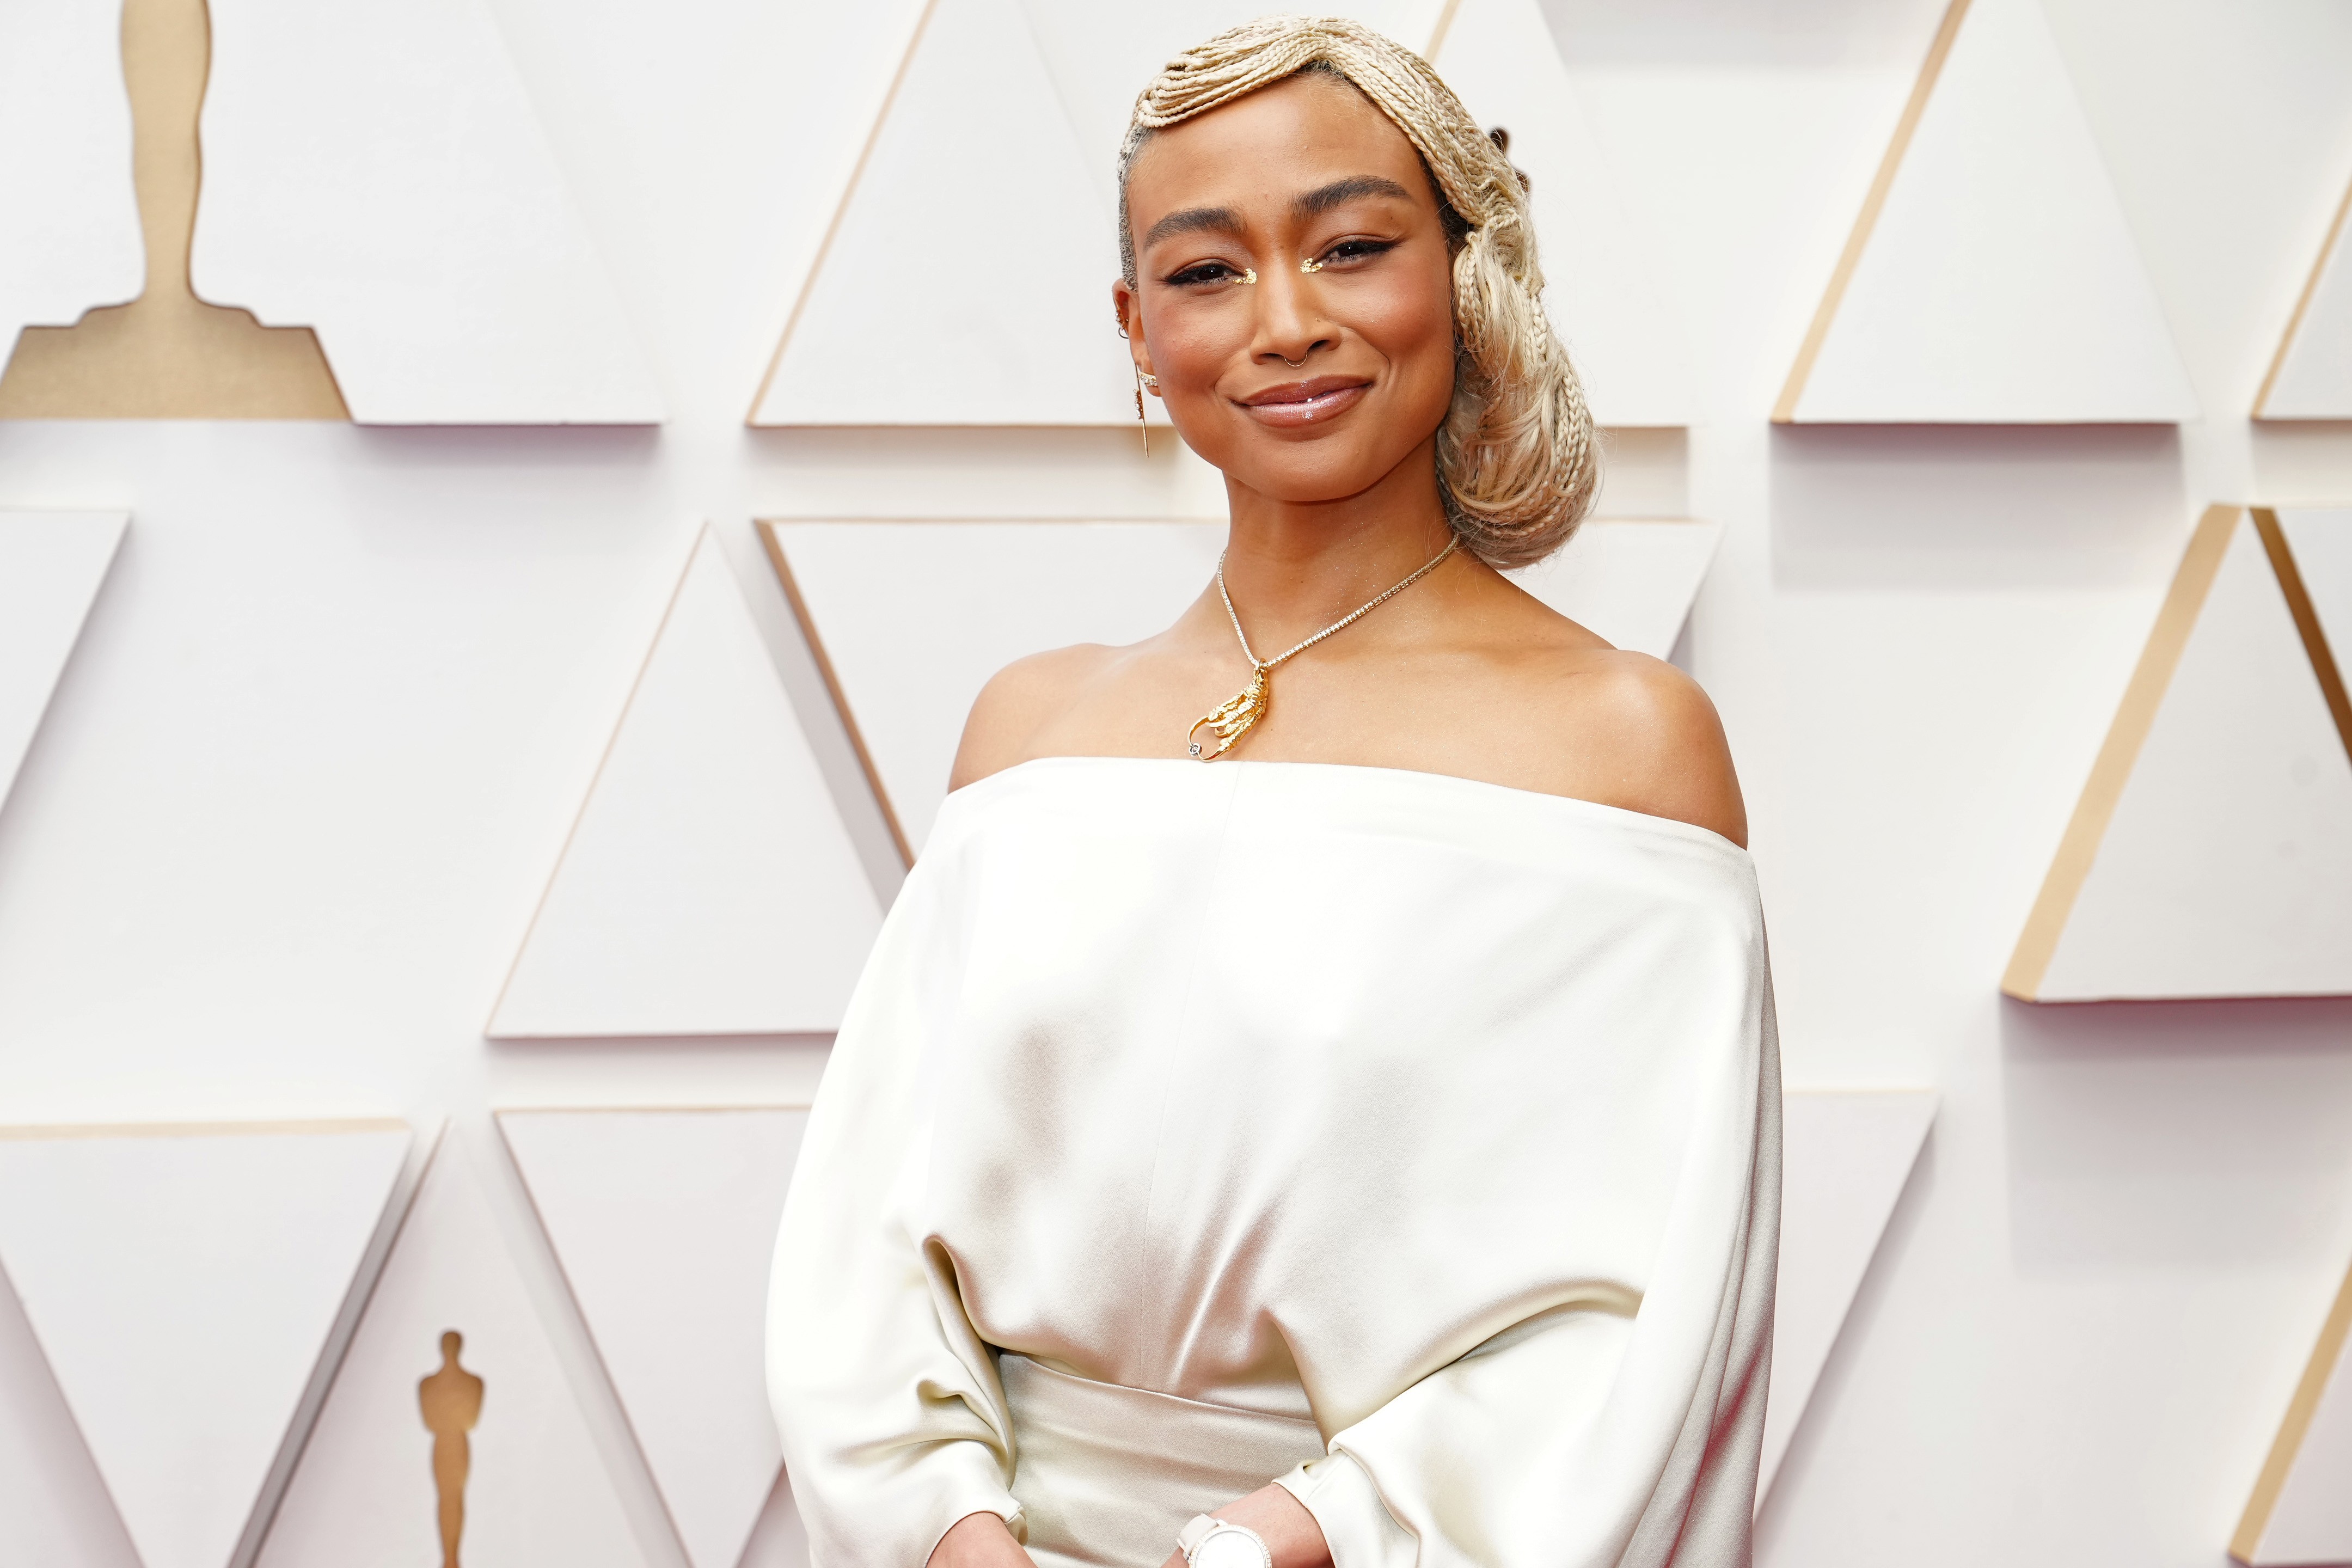 HOLLYWOOD, CALIFORNIA - MARCH 27: Tati Gabrielle attends the 94th Annual Academy Awards at Hollywood and Highland on March 27, 2022 in Hollywood, California. (Photo by Jeff Kravitz/FilmMagic) (Foto: FilmMagic)